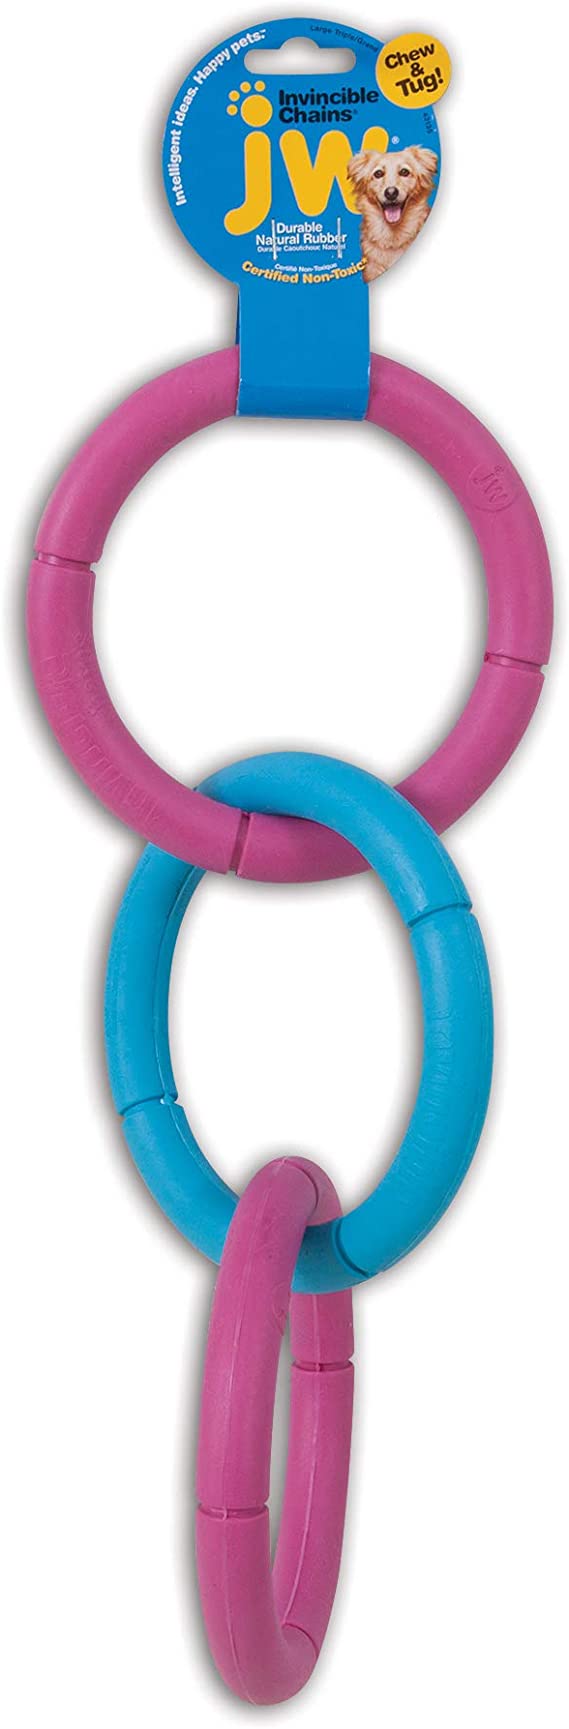 JW Pet Invincible Chain Dog Toy